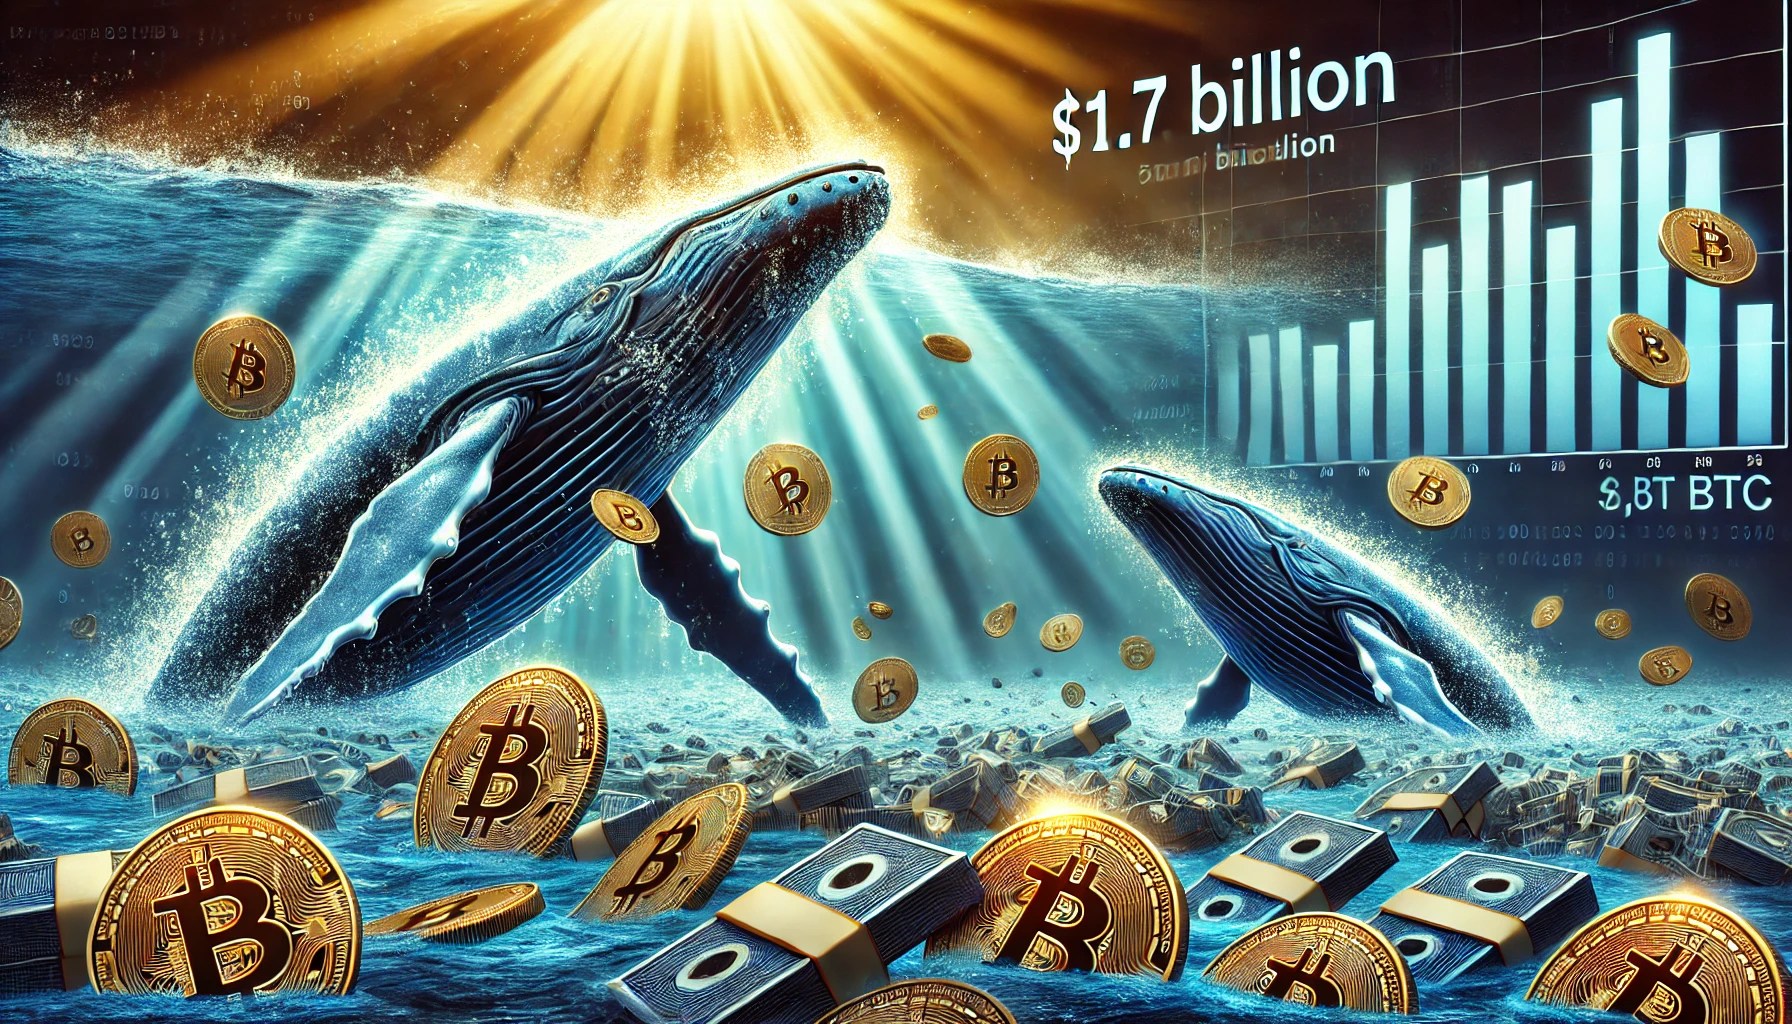 On-chain data shows the Bitcoin whales took part in significant net distribution in the past month, potentially feeding into BTC’s bearish momentum. Bitcoin Whales Have Been Selling Amid Bearish Market As pointed out by analyst Ali in a new post on X, the BTC whales have been selling recently. The on-chain indicator of interest here